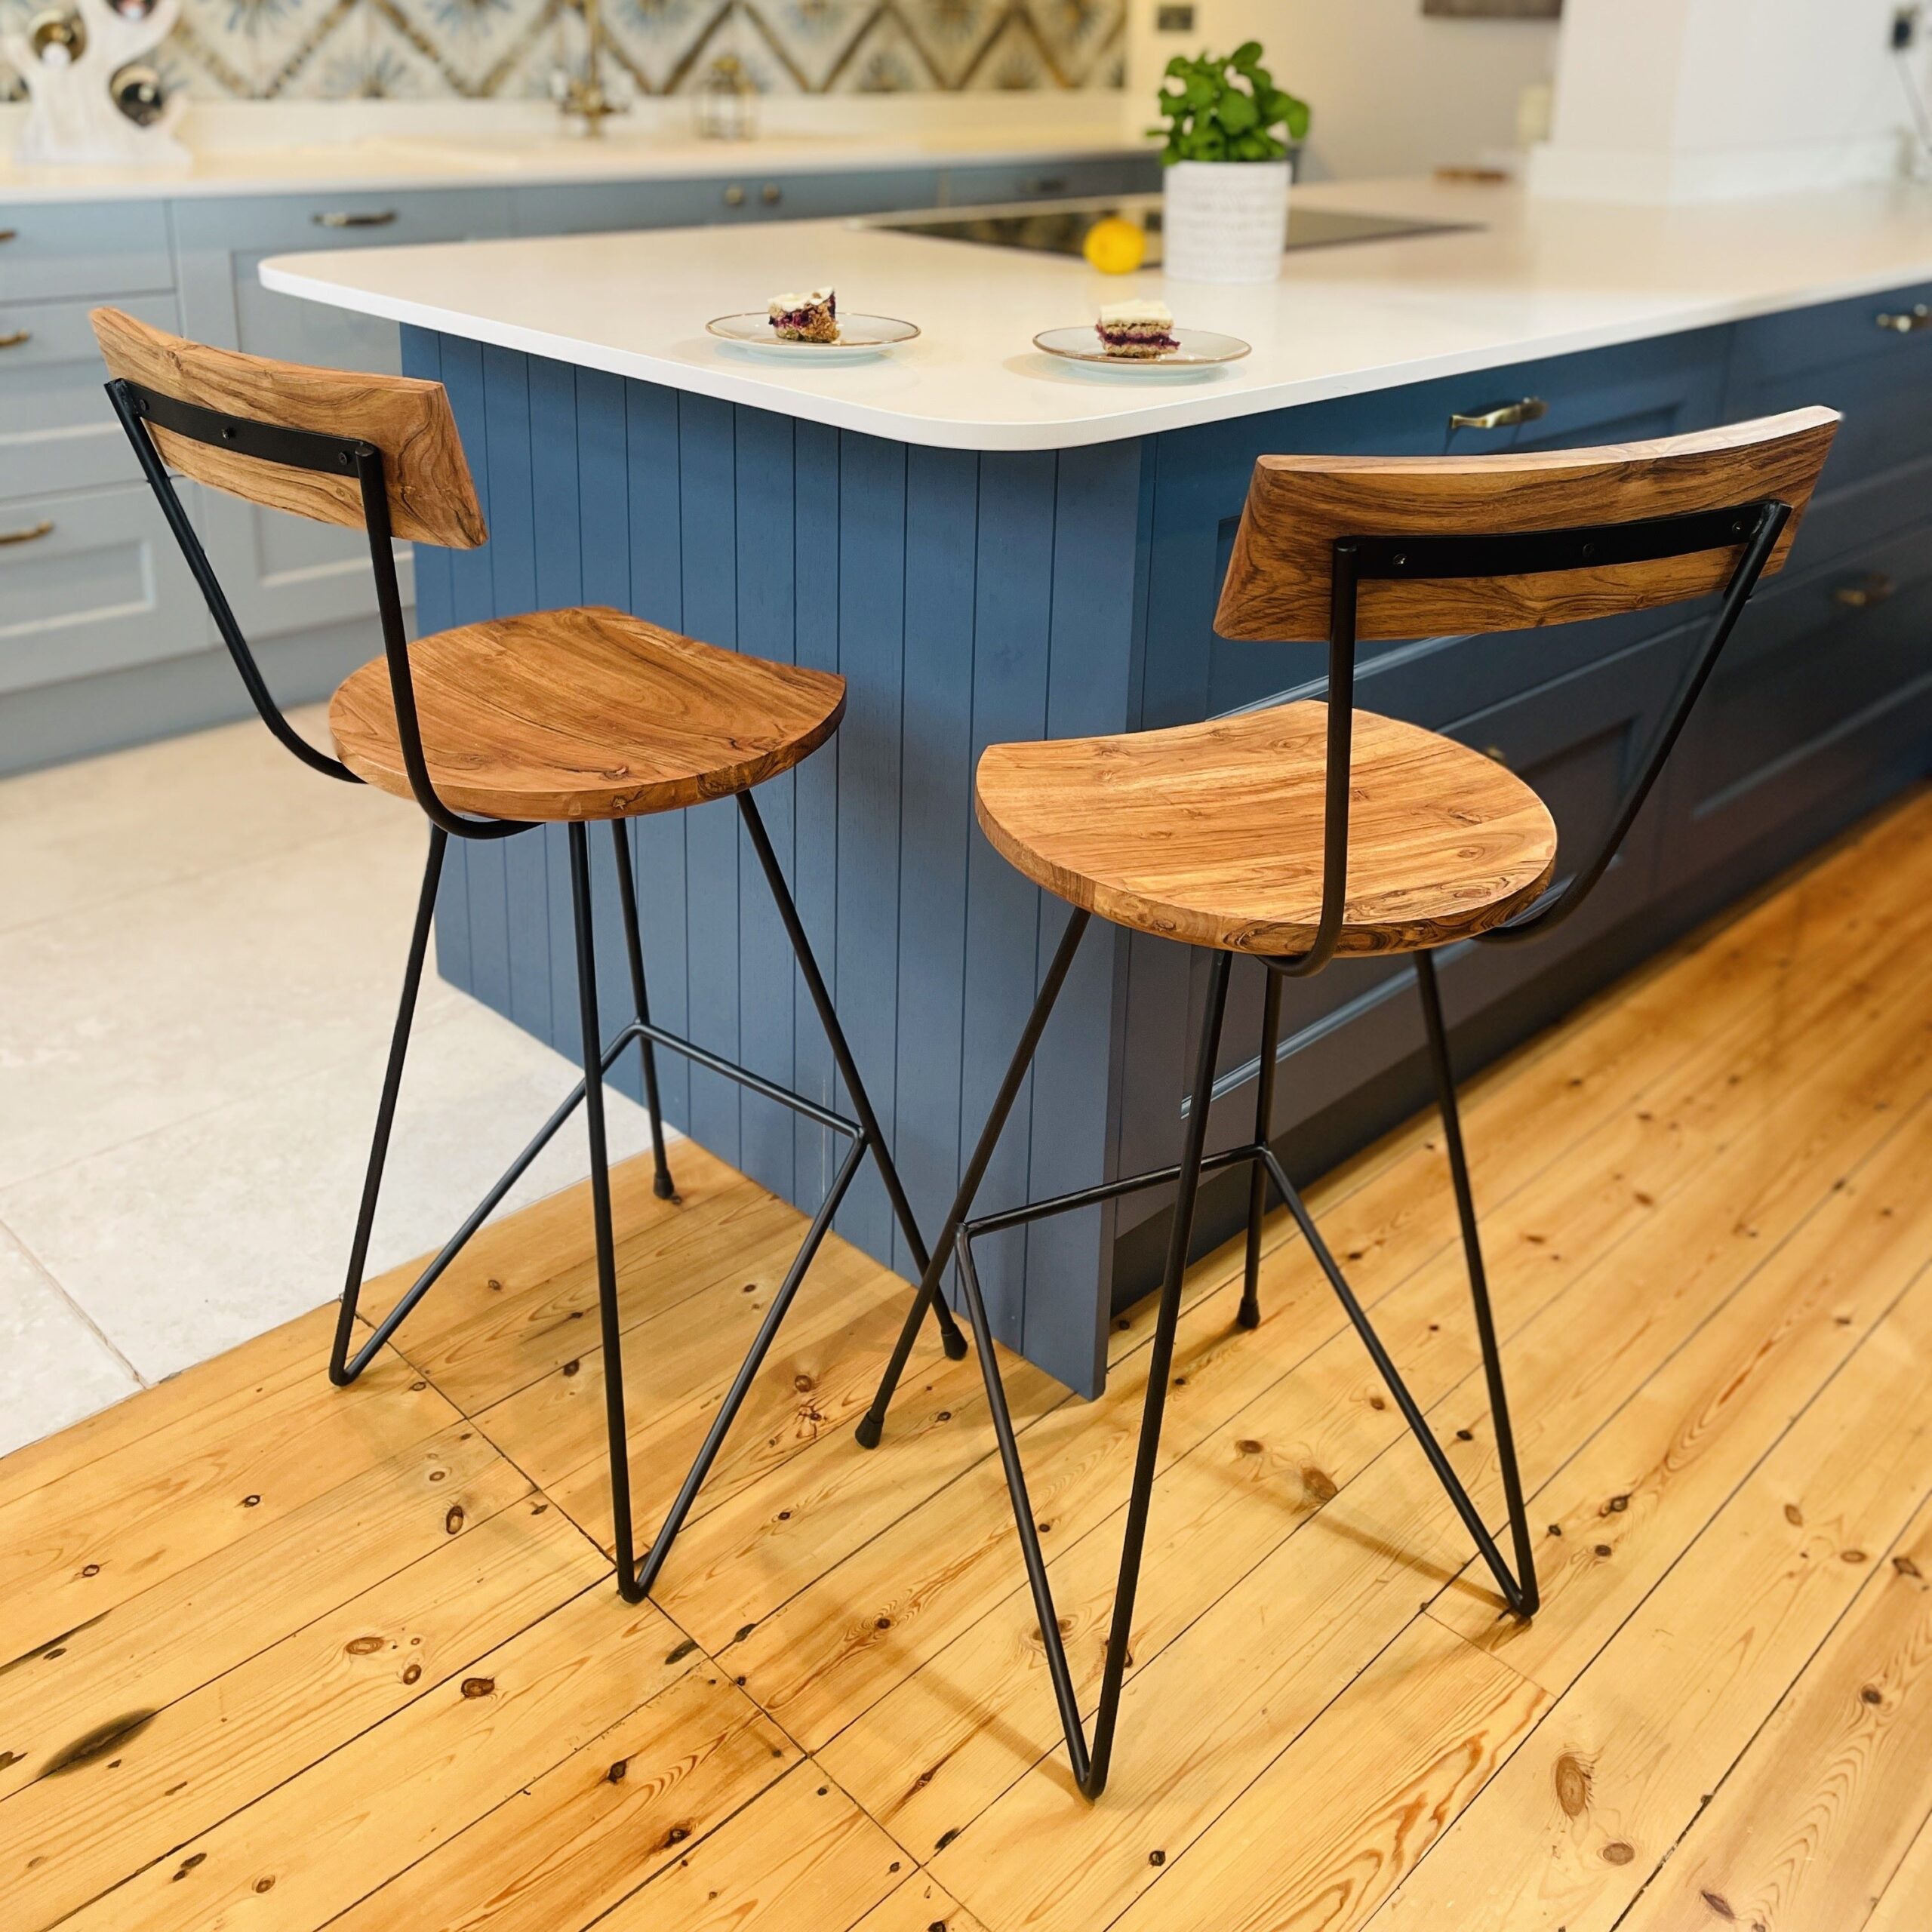 Two industrial bar stools in front of blue kitchen island